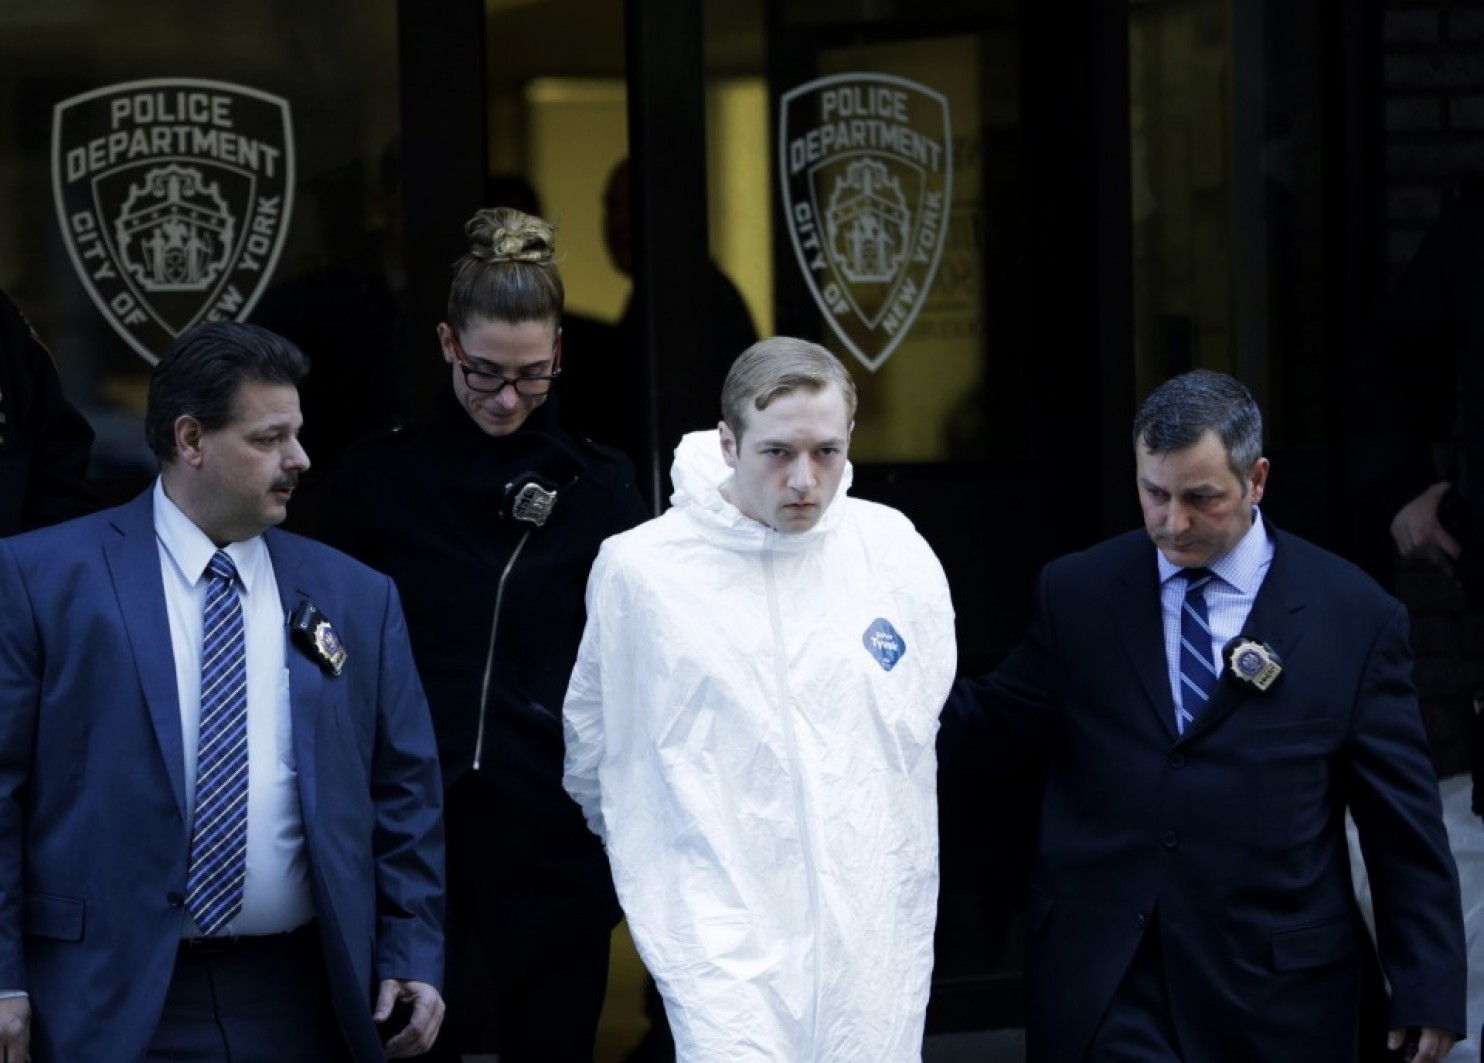 James Harris Jackson is led out of a police precinct in New York. Photo: Seth Wenig | Associated Press.